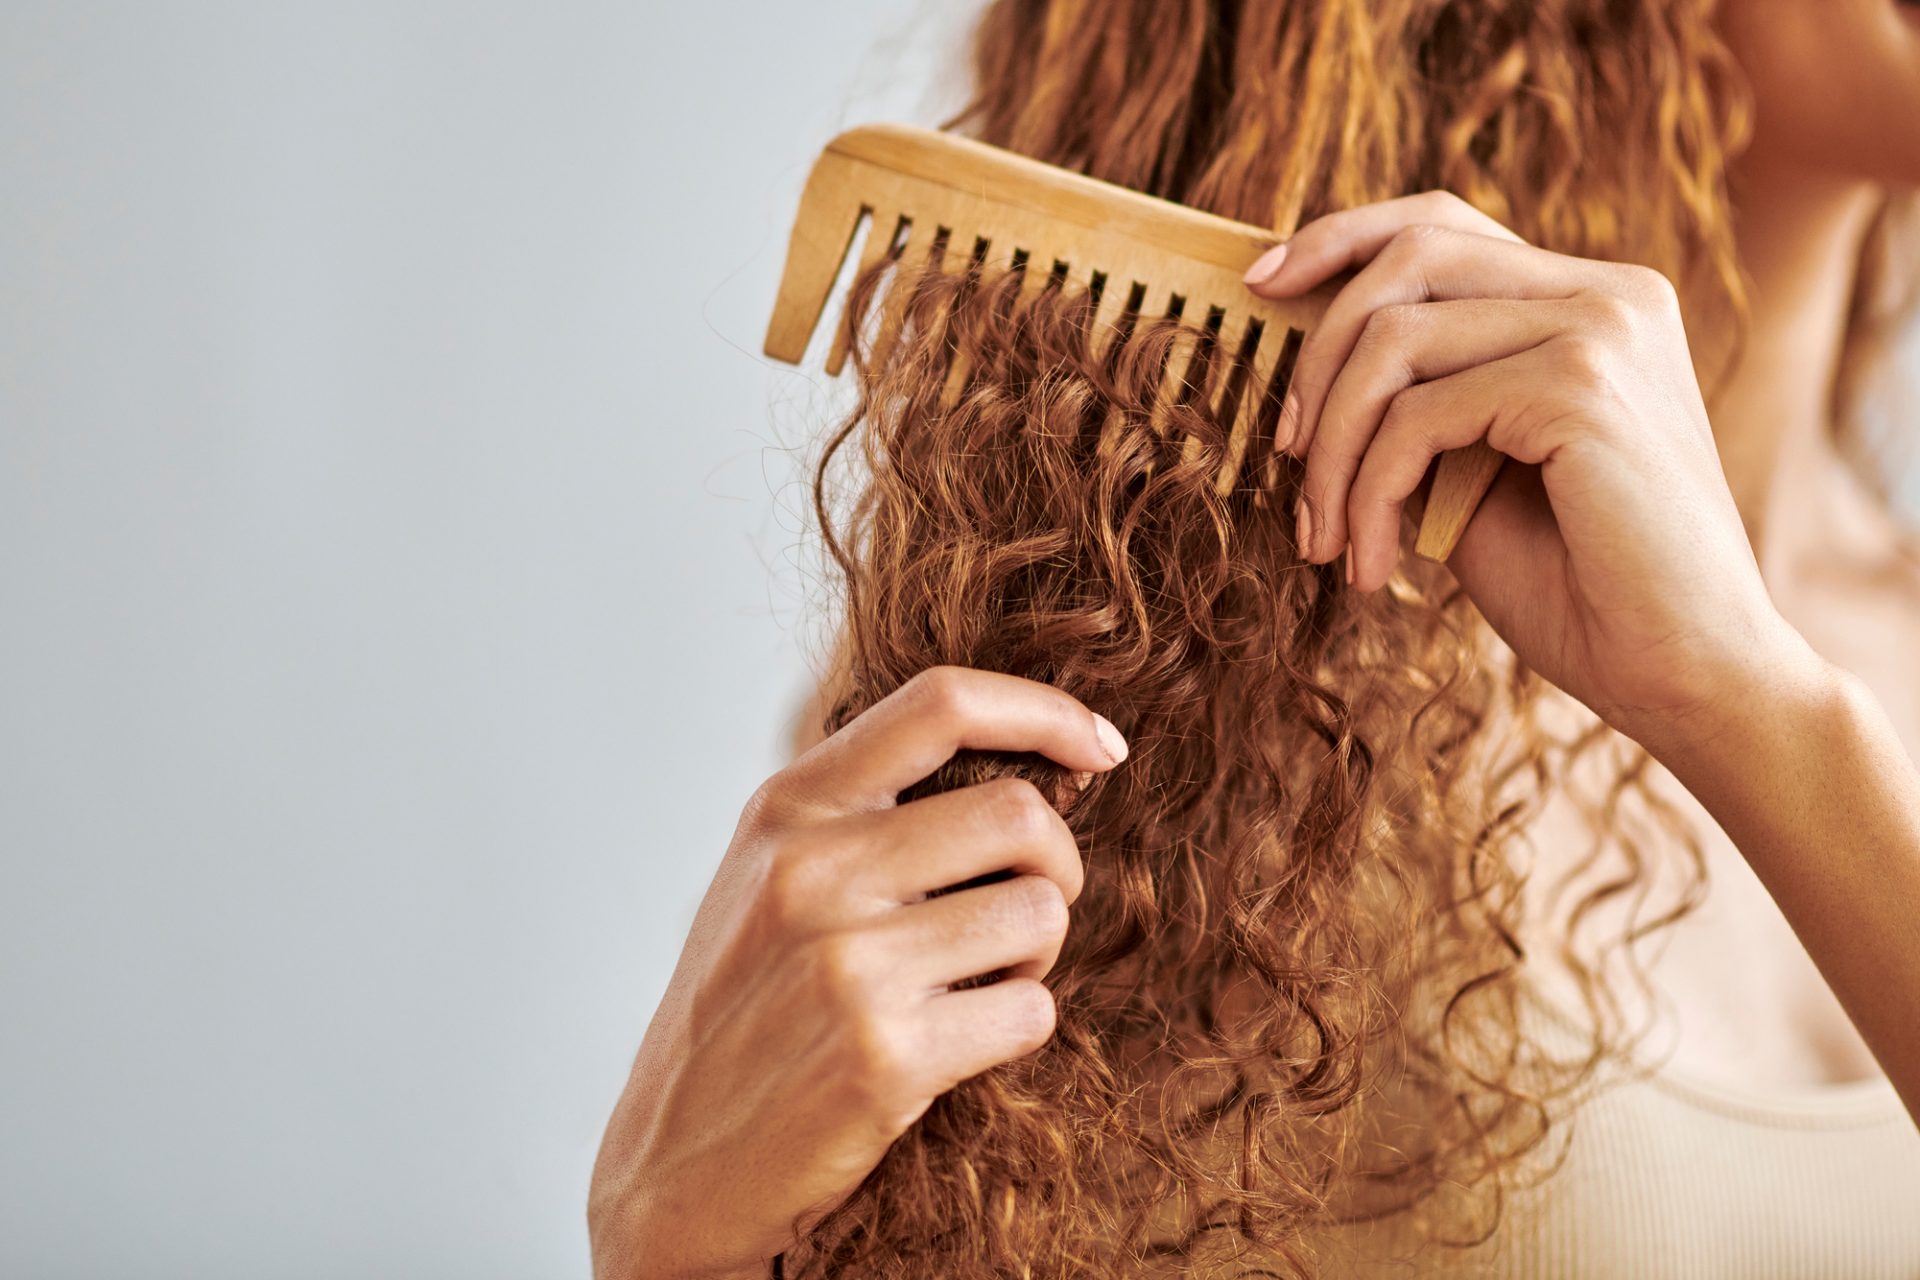 If your hair is dry or curly, be careful with overwashing